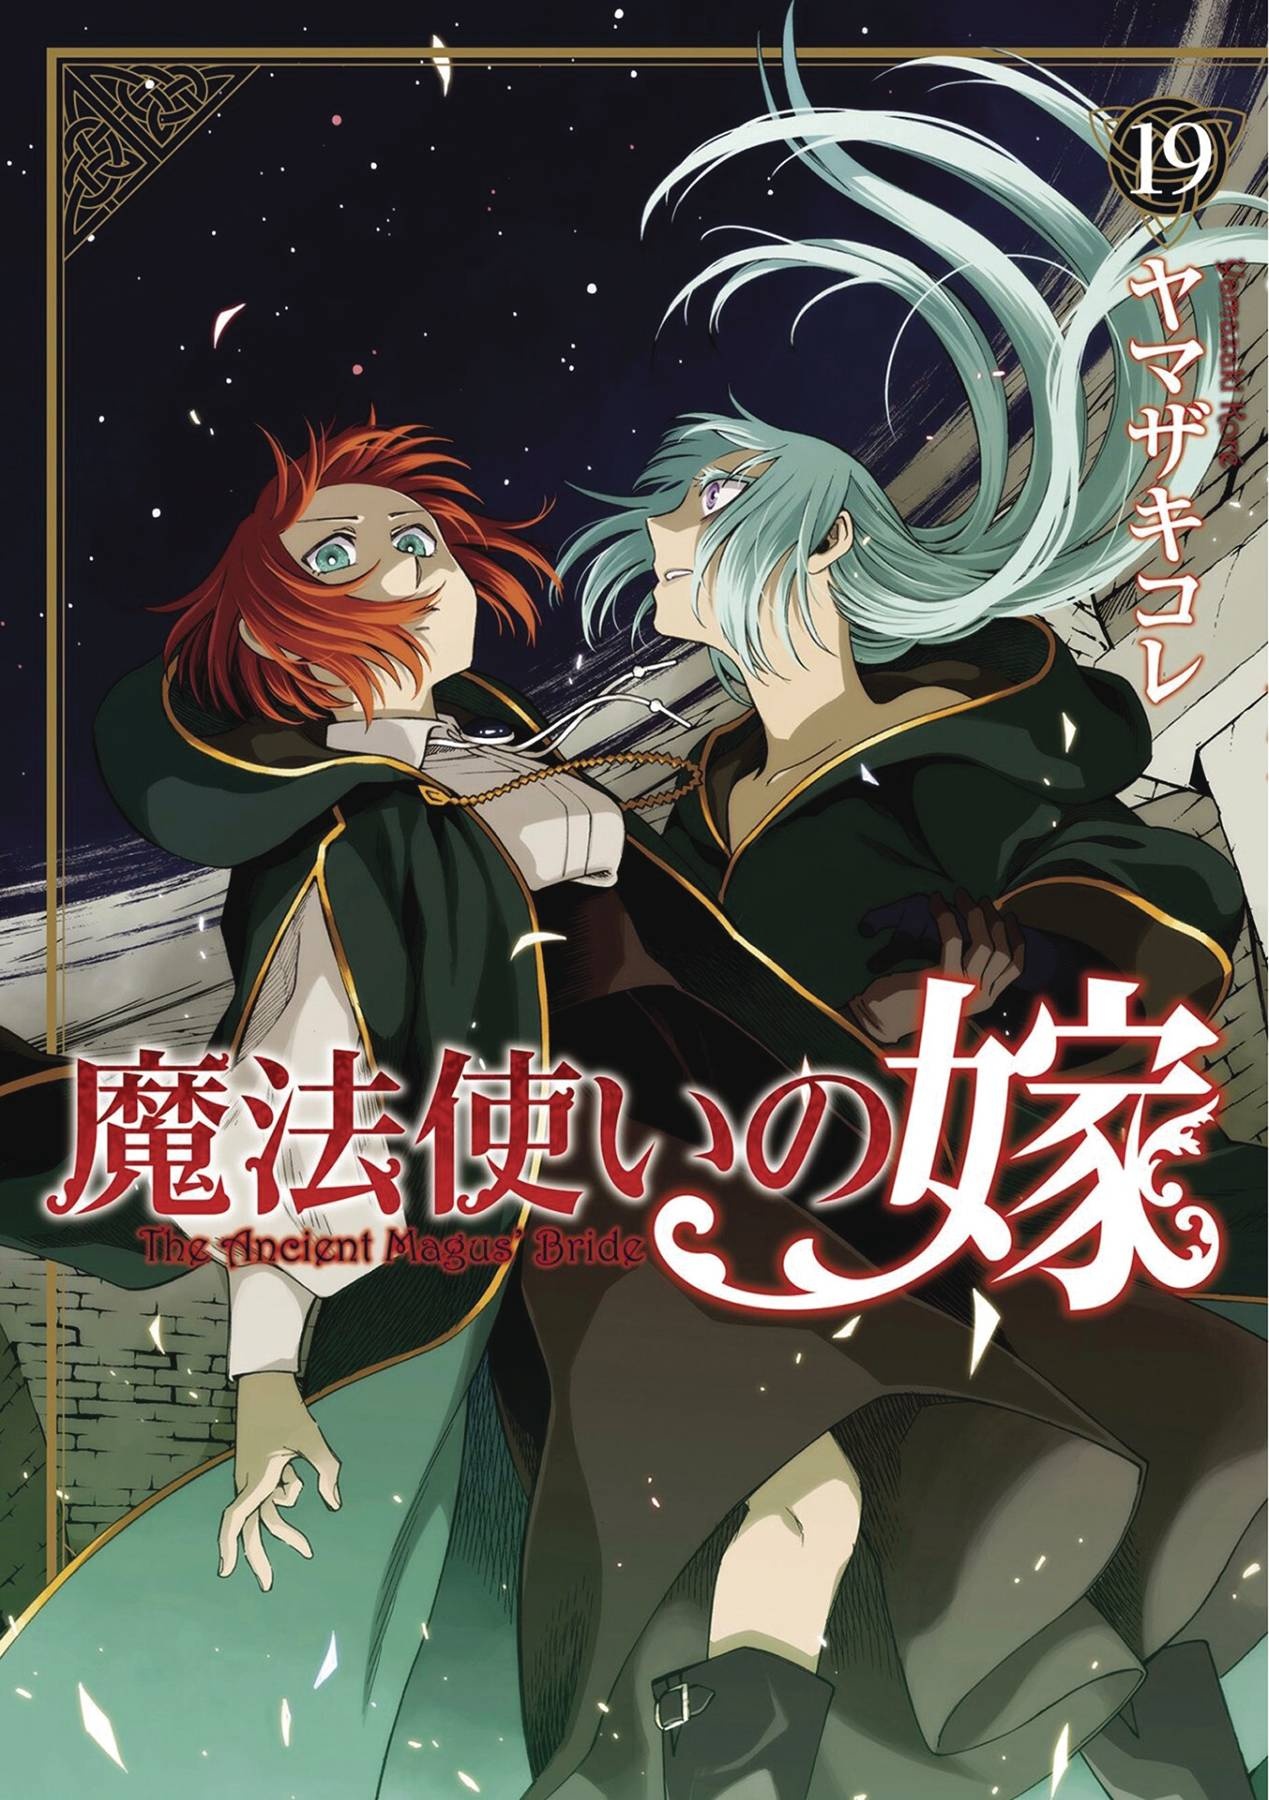 Front and back cover for volume 19 revealed : r/AncientMagusBride